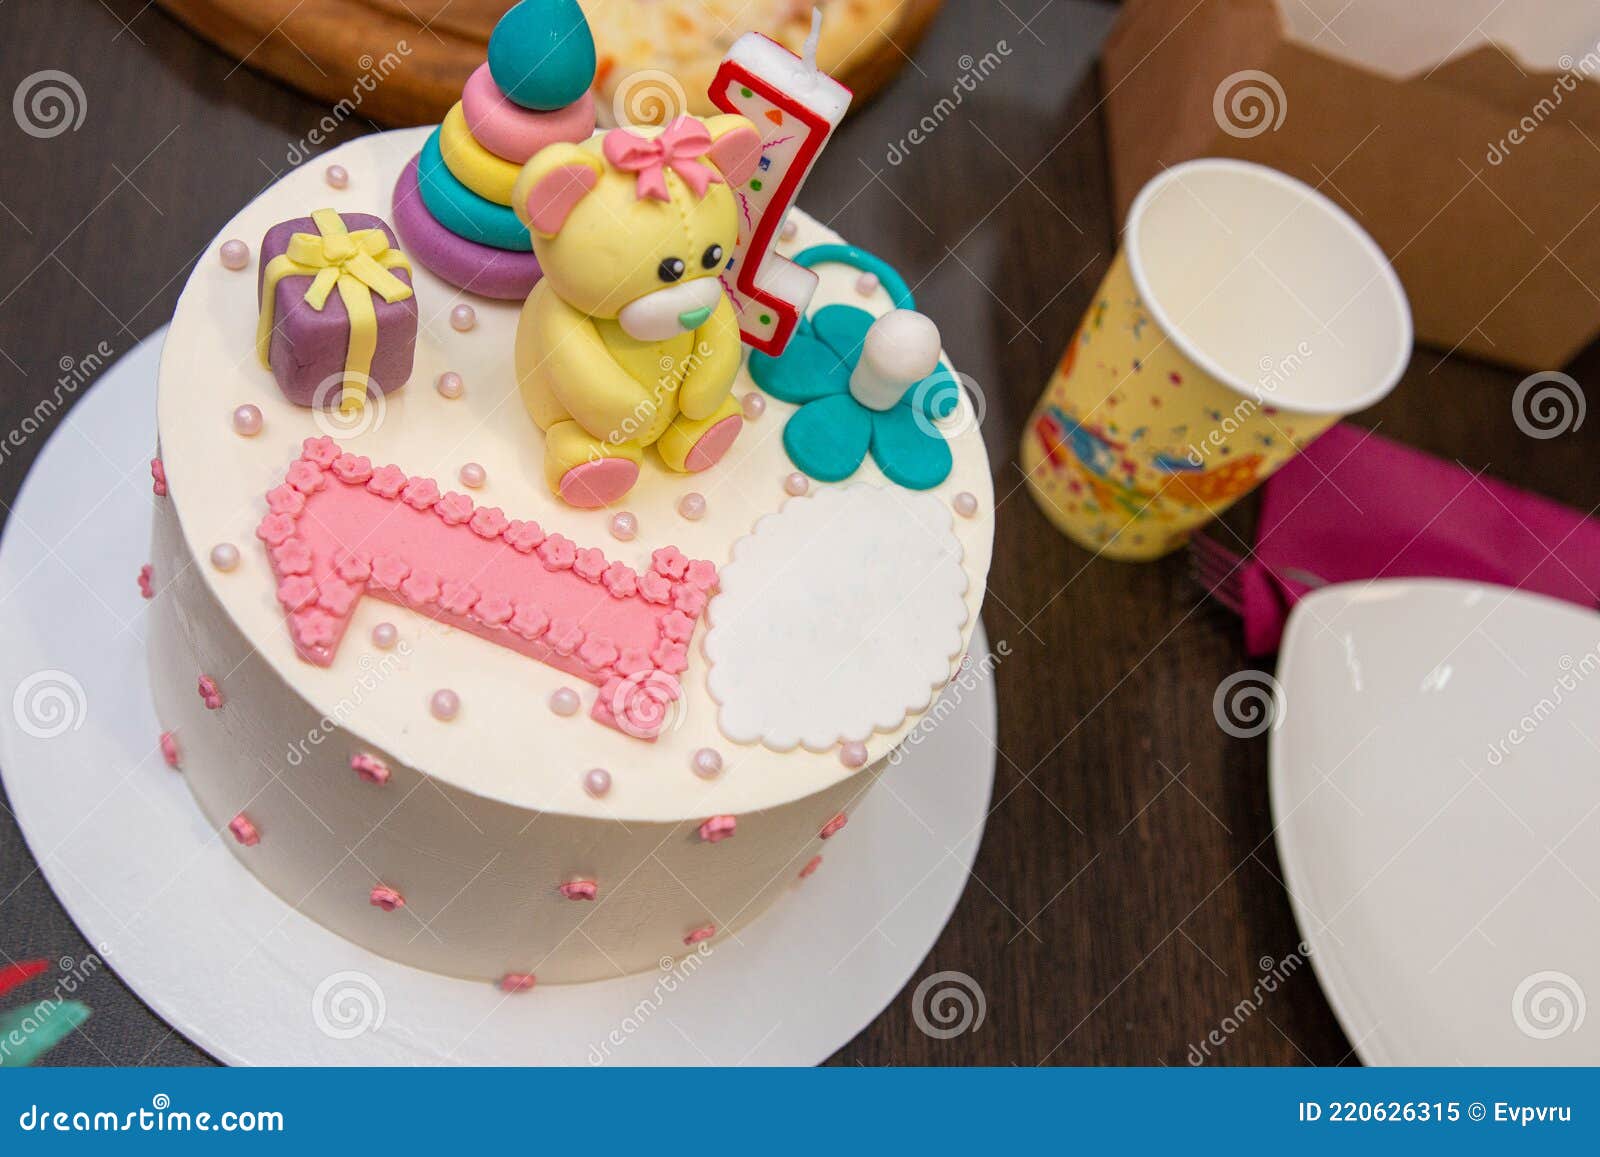 912 Birthday Cake One Year Old Baby Photos Free Royalty Free Stock Photos From Dreamstime